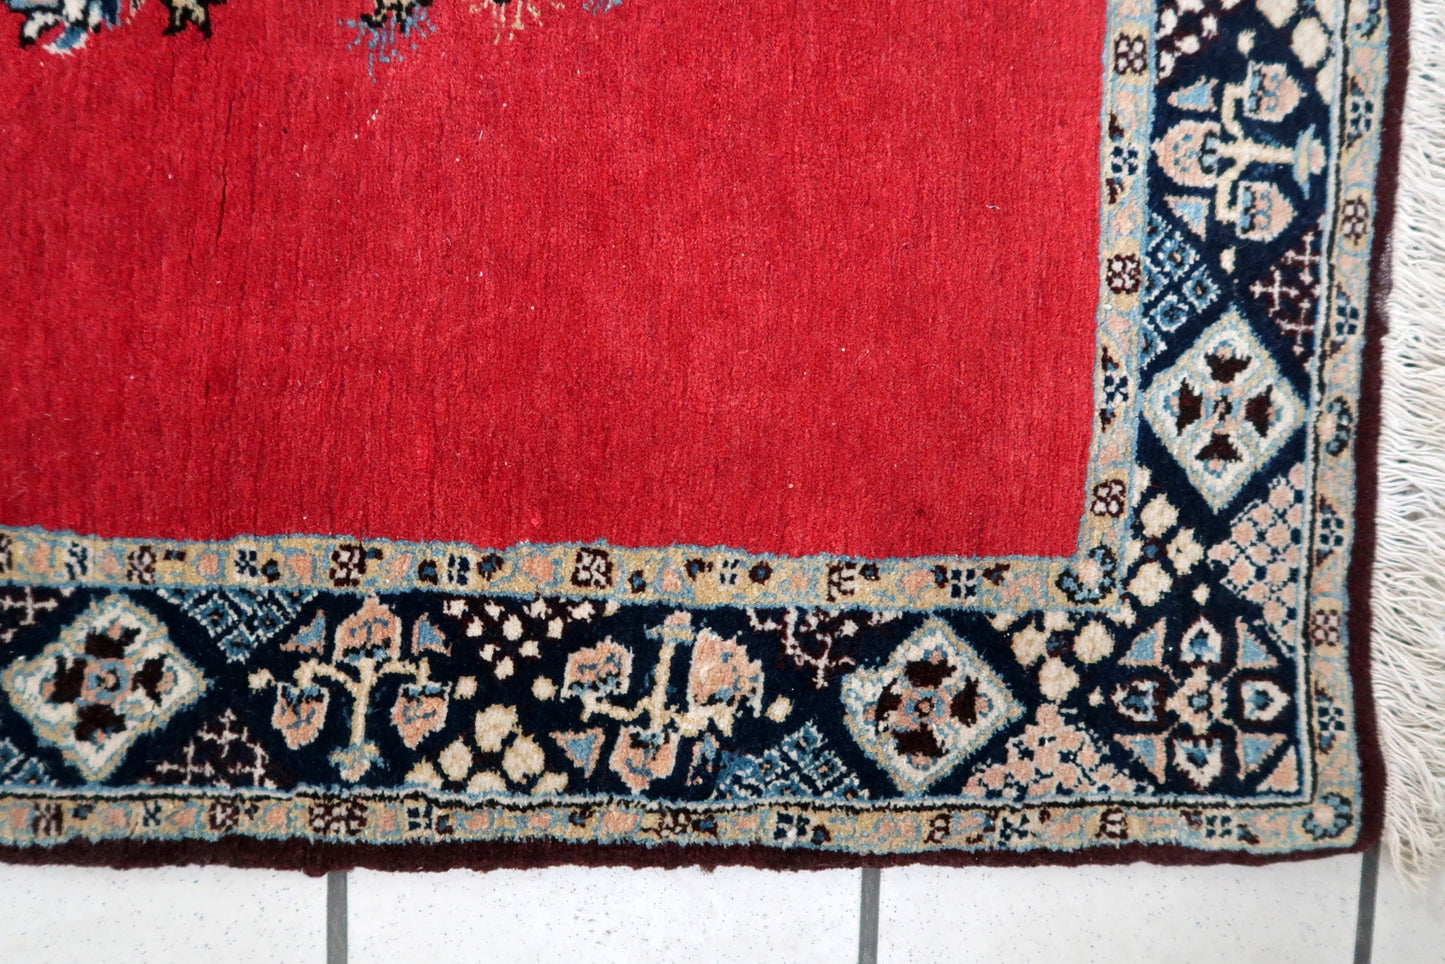 Handmade vintage Persian Tabriz rug in bright red color with large medallion. The rug is from the middle of 20th century in original good condition.